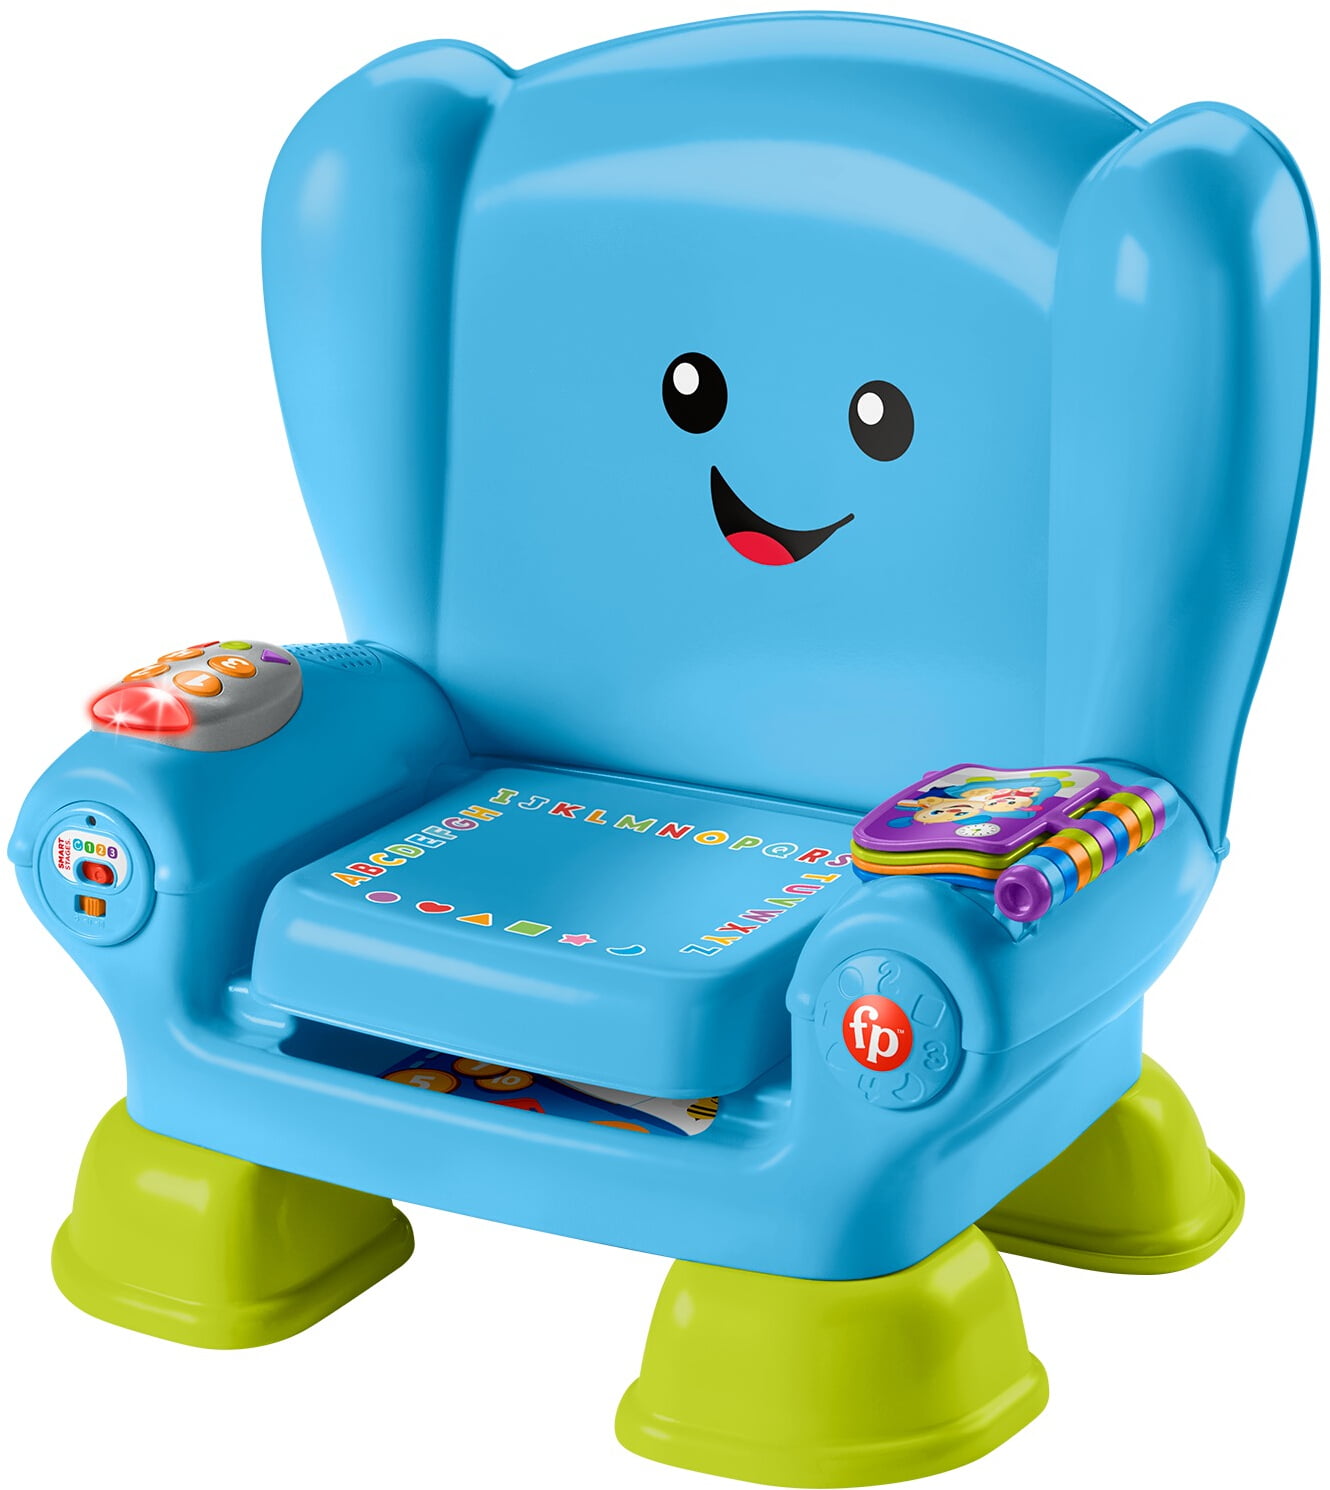 Details about   Fisher Price Dance And Groove Rockit 